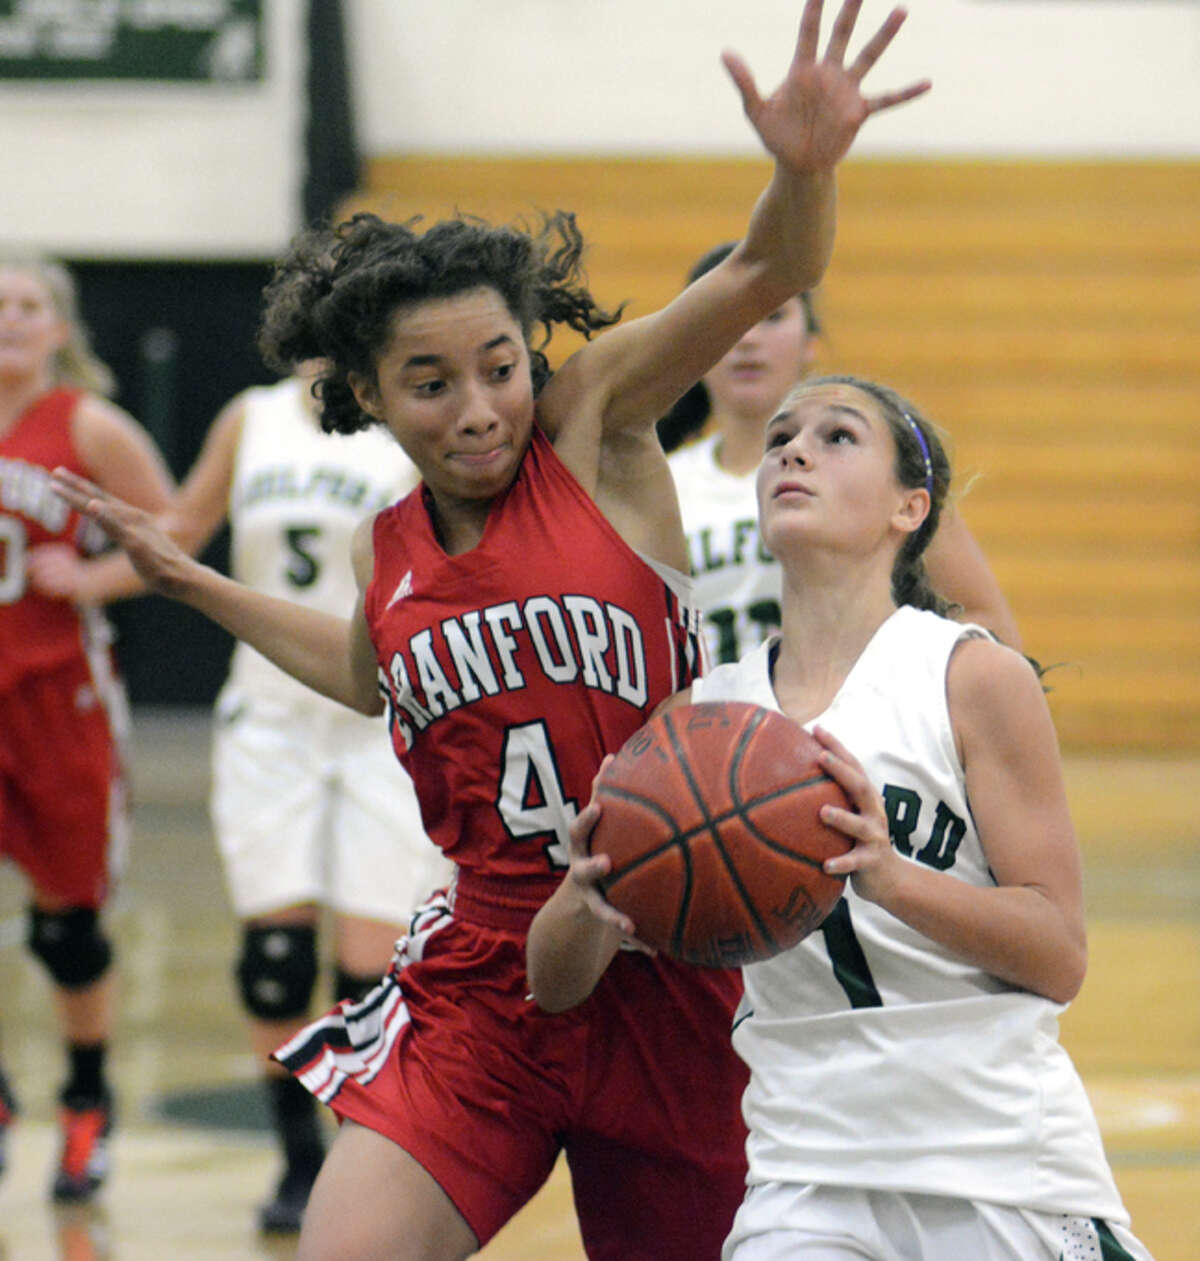 Photo by Dave Phillips/ Guilford’s Andrea Basilicato (1) eyes the basket as Branford’s Jade Maddox defends in Friday night’s game. Guilford won 39-38. Basilicato, a freshman, led the Indians with 10 points.